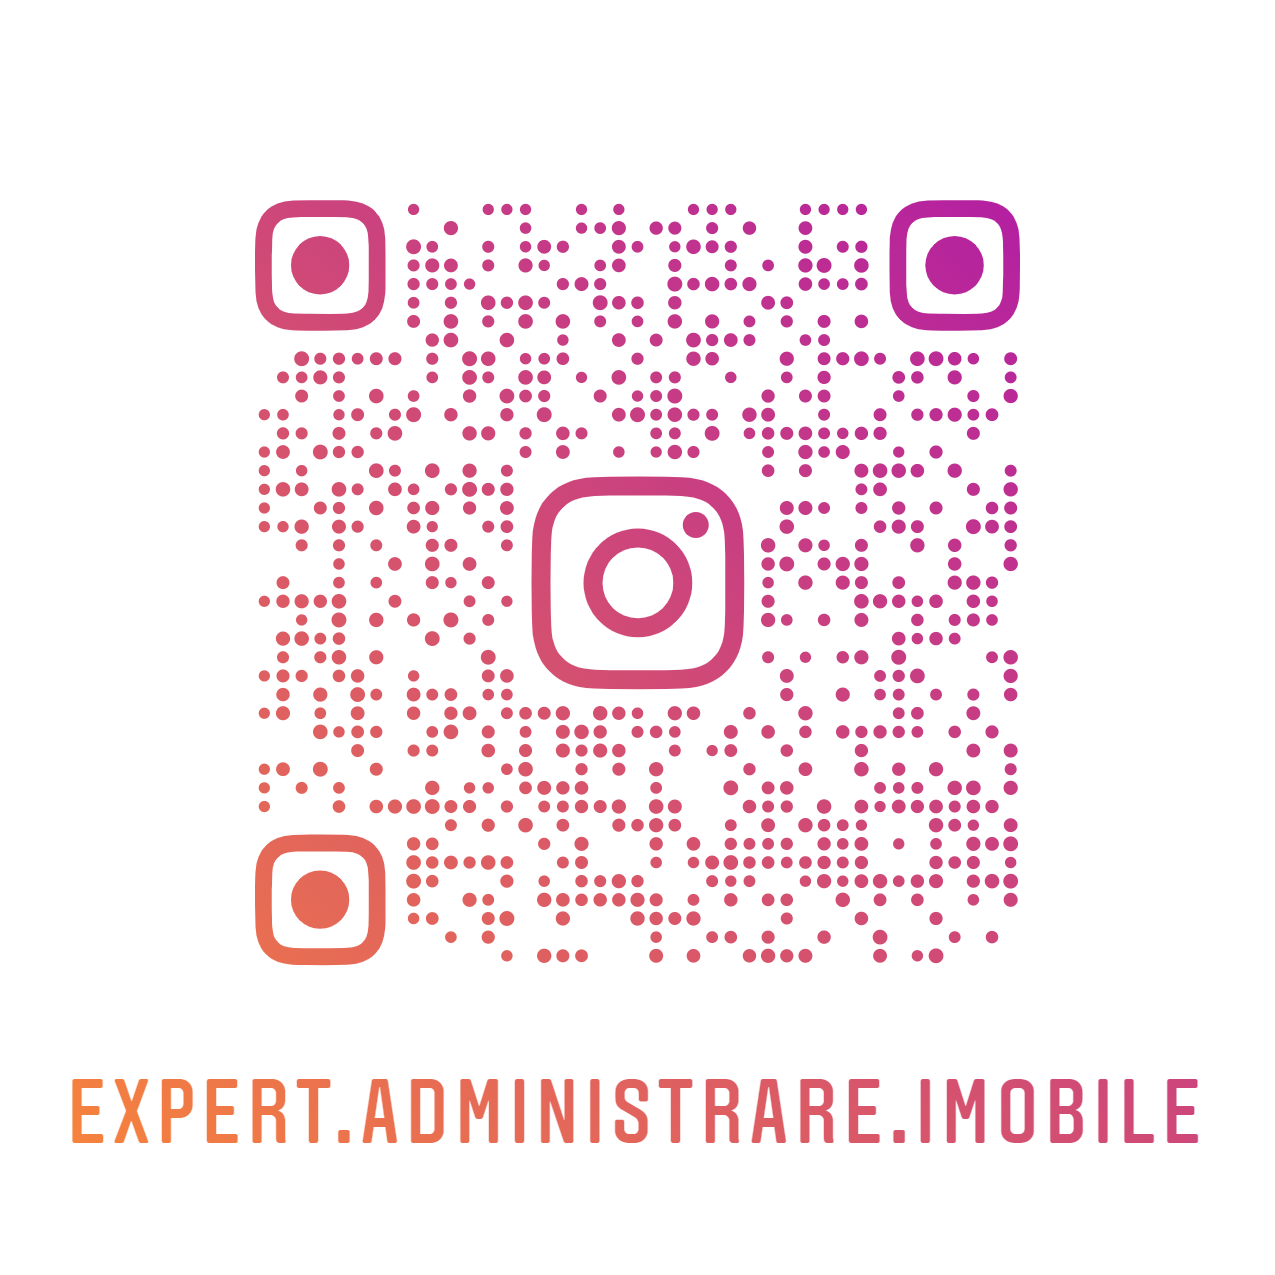 Firma administrare imobile sector 4 , www.instagram.com/expert.administrare.imobile/